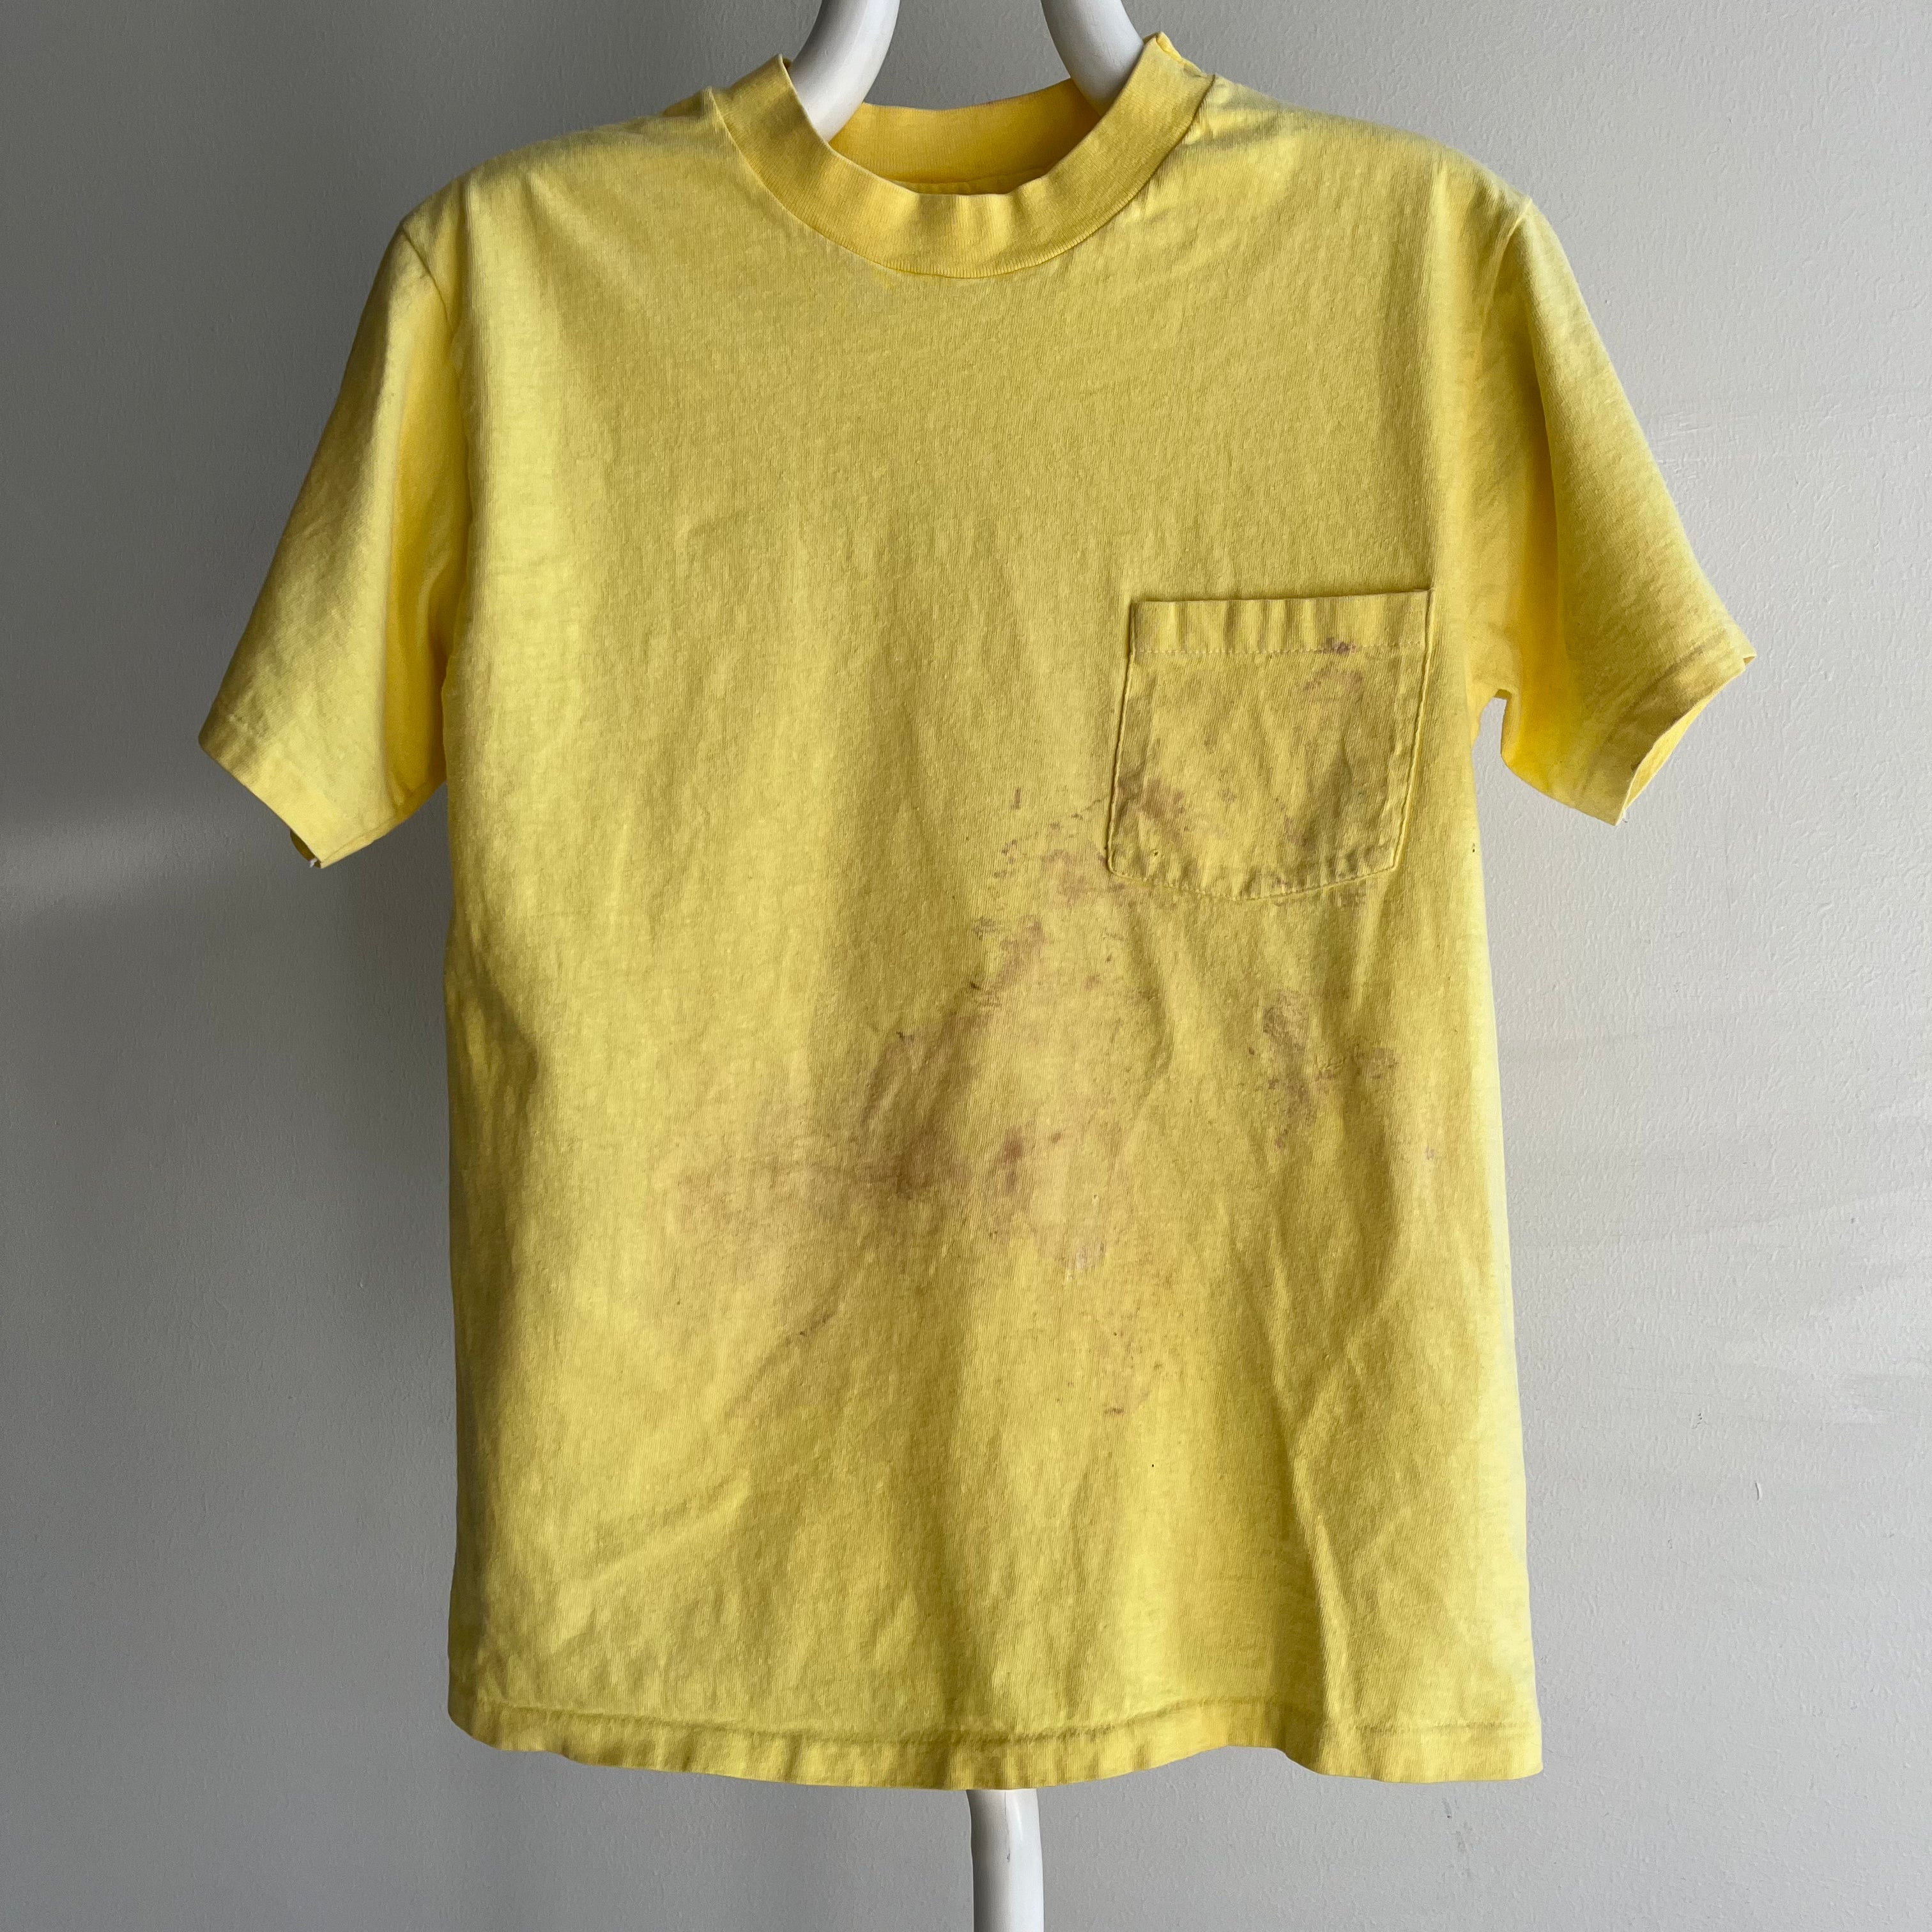 1980s Home of the Pickeled Pig Lips - Really Stained Cotton Pocket T-Shirt